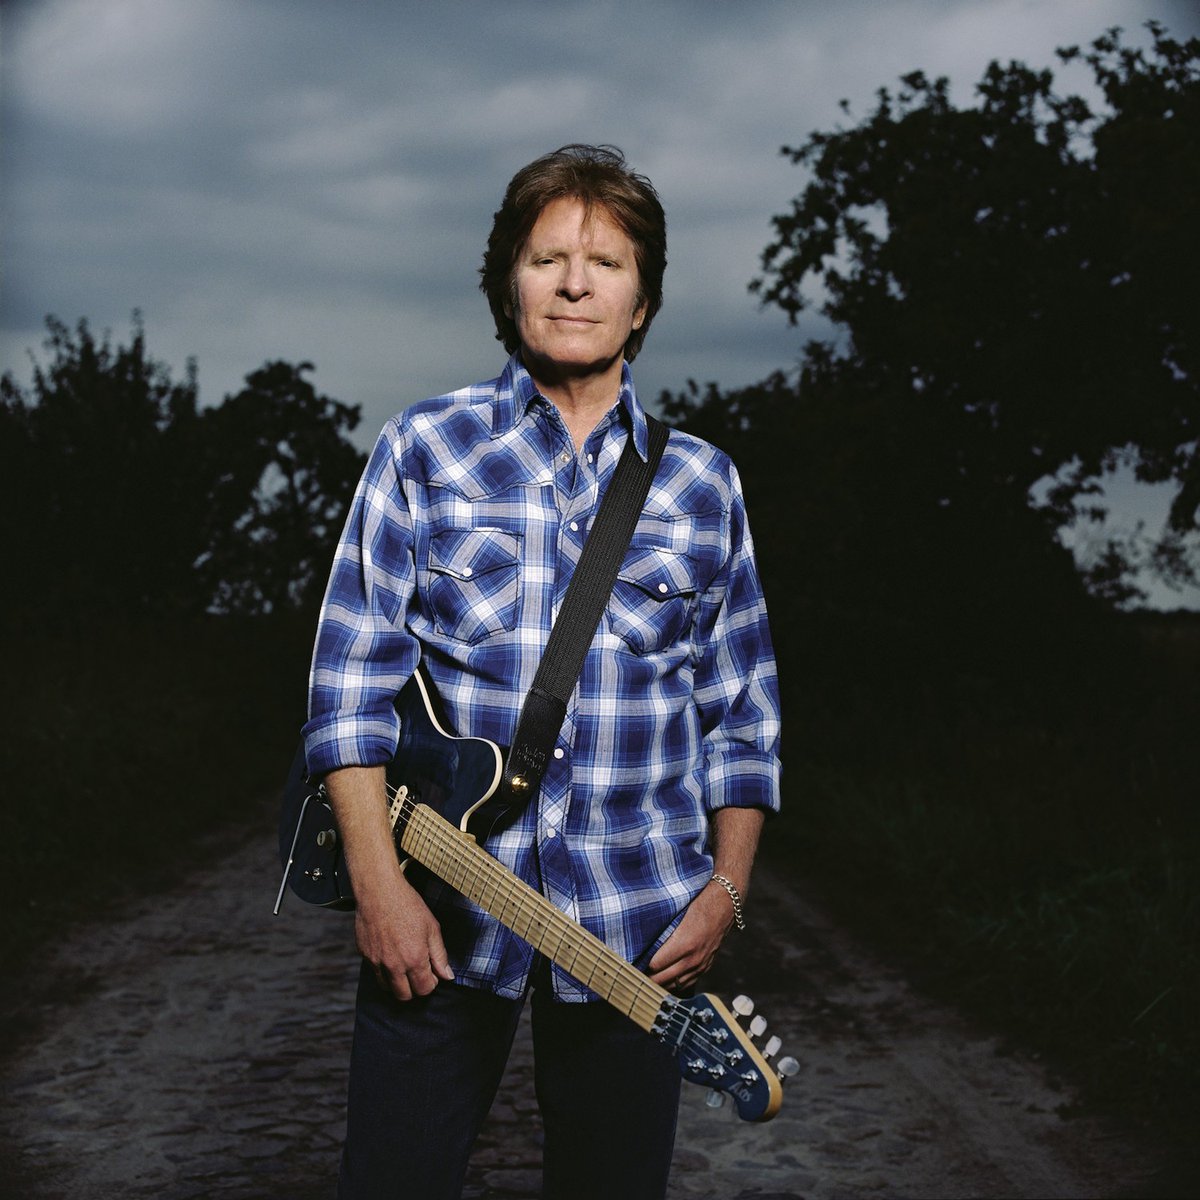 Happy birthday @John_Fogerty (#CreedenceClearwaterRevival). ‘Til forever, on it goes, through the circle, fast and slow. Read our #SoundCheck column on best of the best-ofs: @TheOfficialCCR, #LeonardCohen, @gobetweensnet, @neworder, @nickcave & @TheKinks: magnetmagazine.com/2006/11/10/sou…